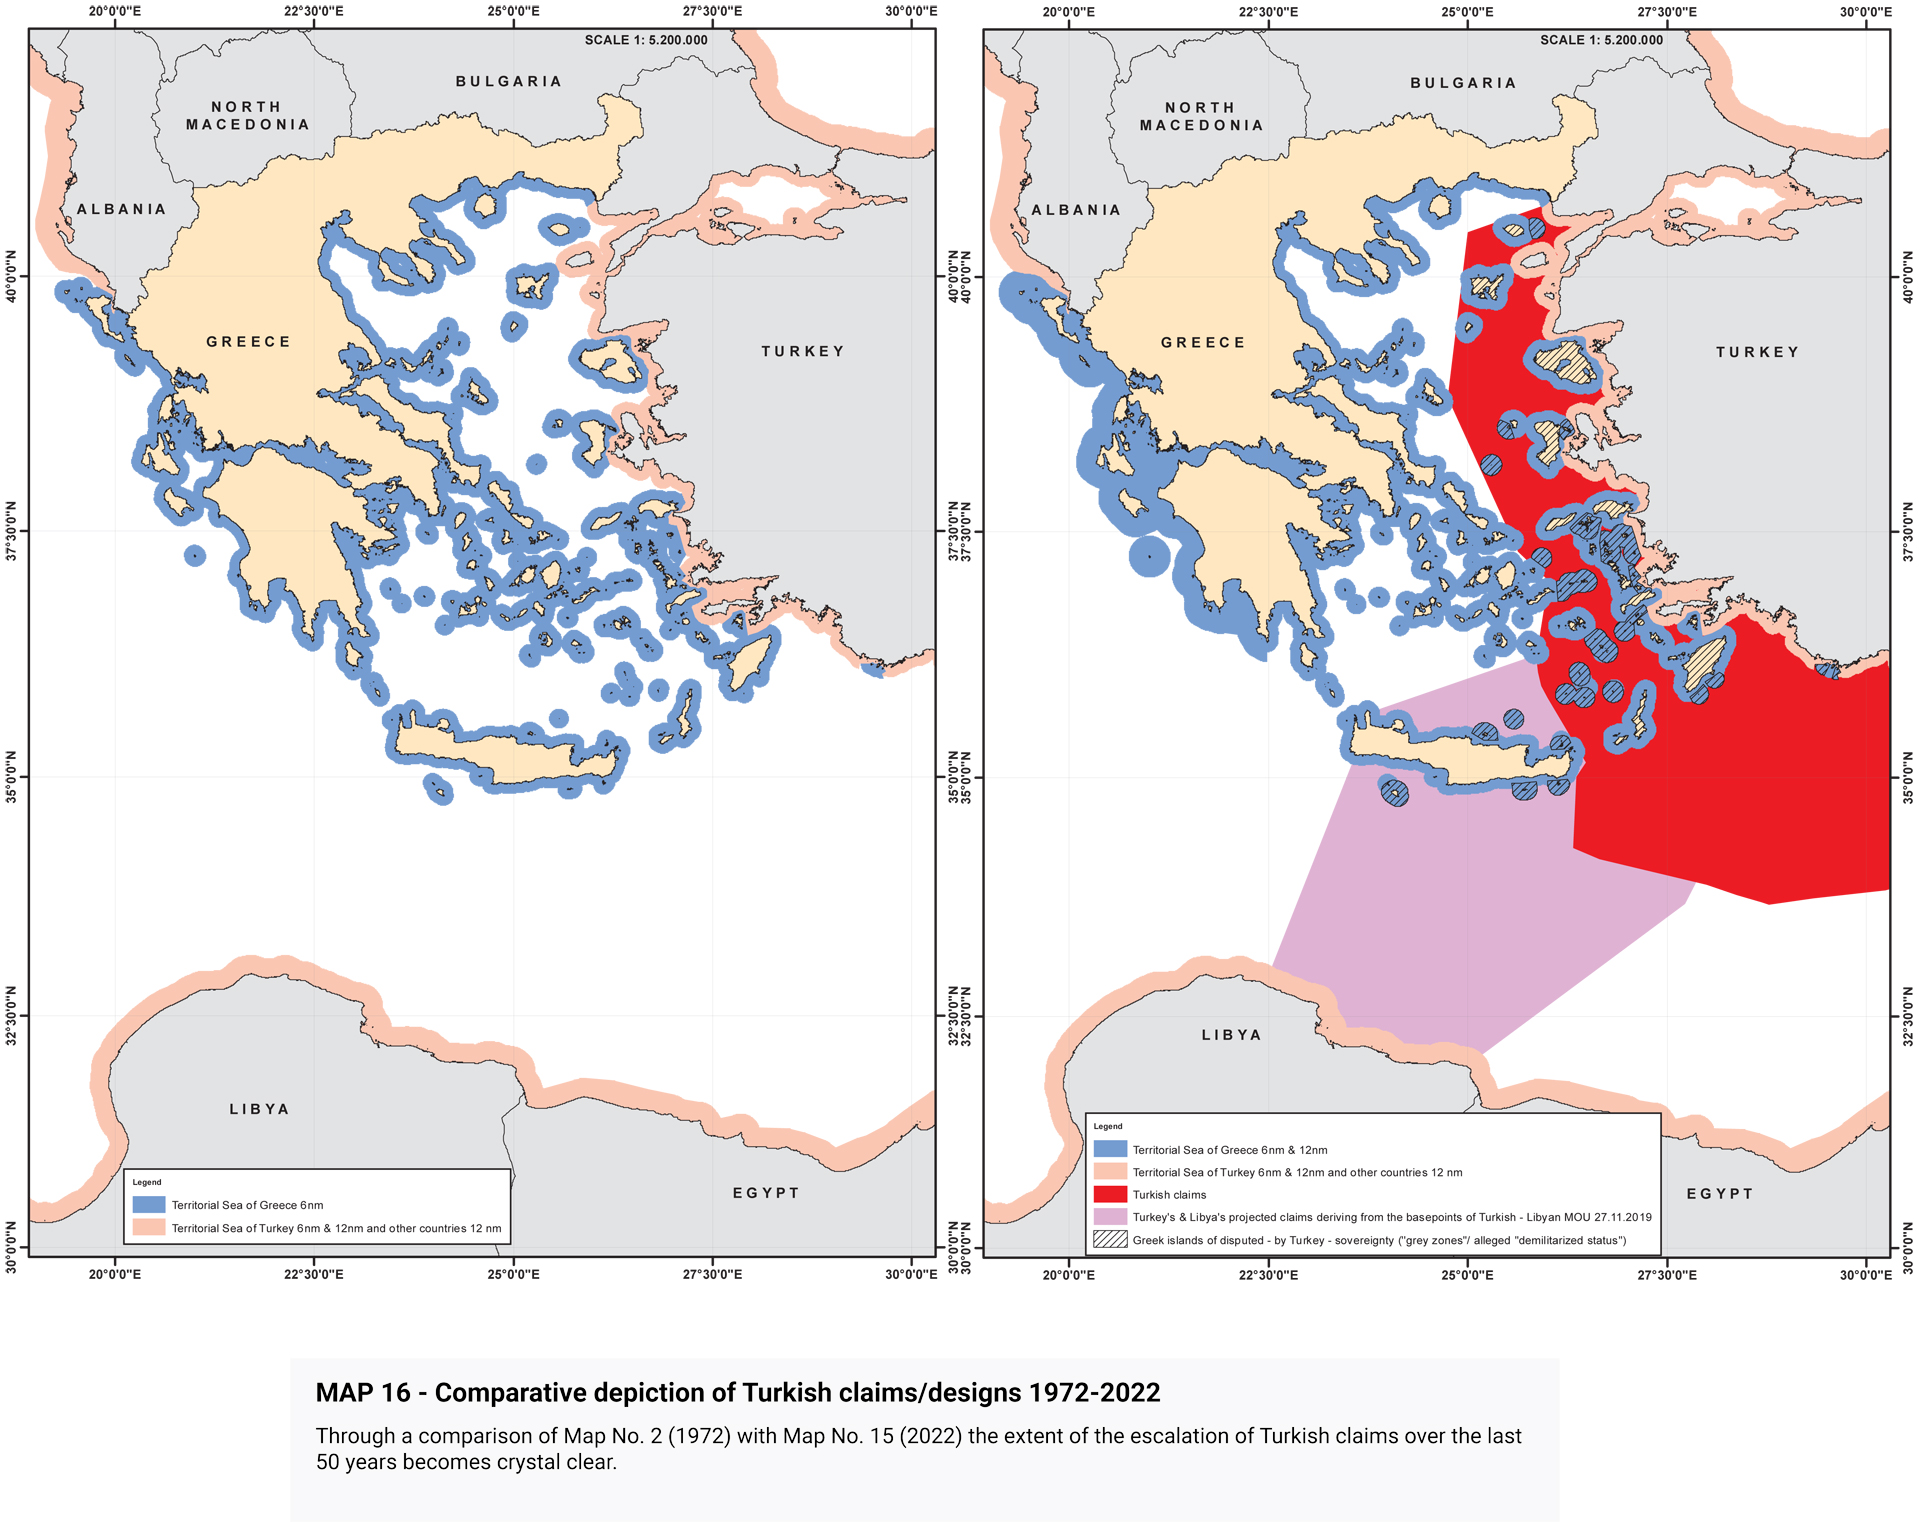 greece-responds-to-turkish-claims-about-islands-with-maps31